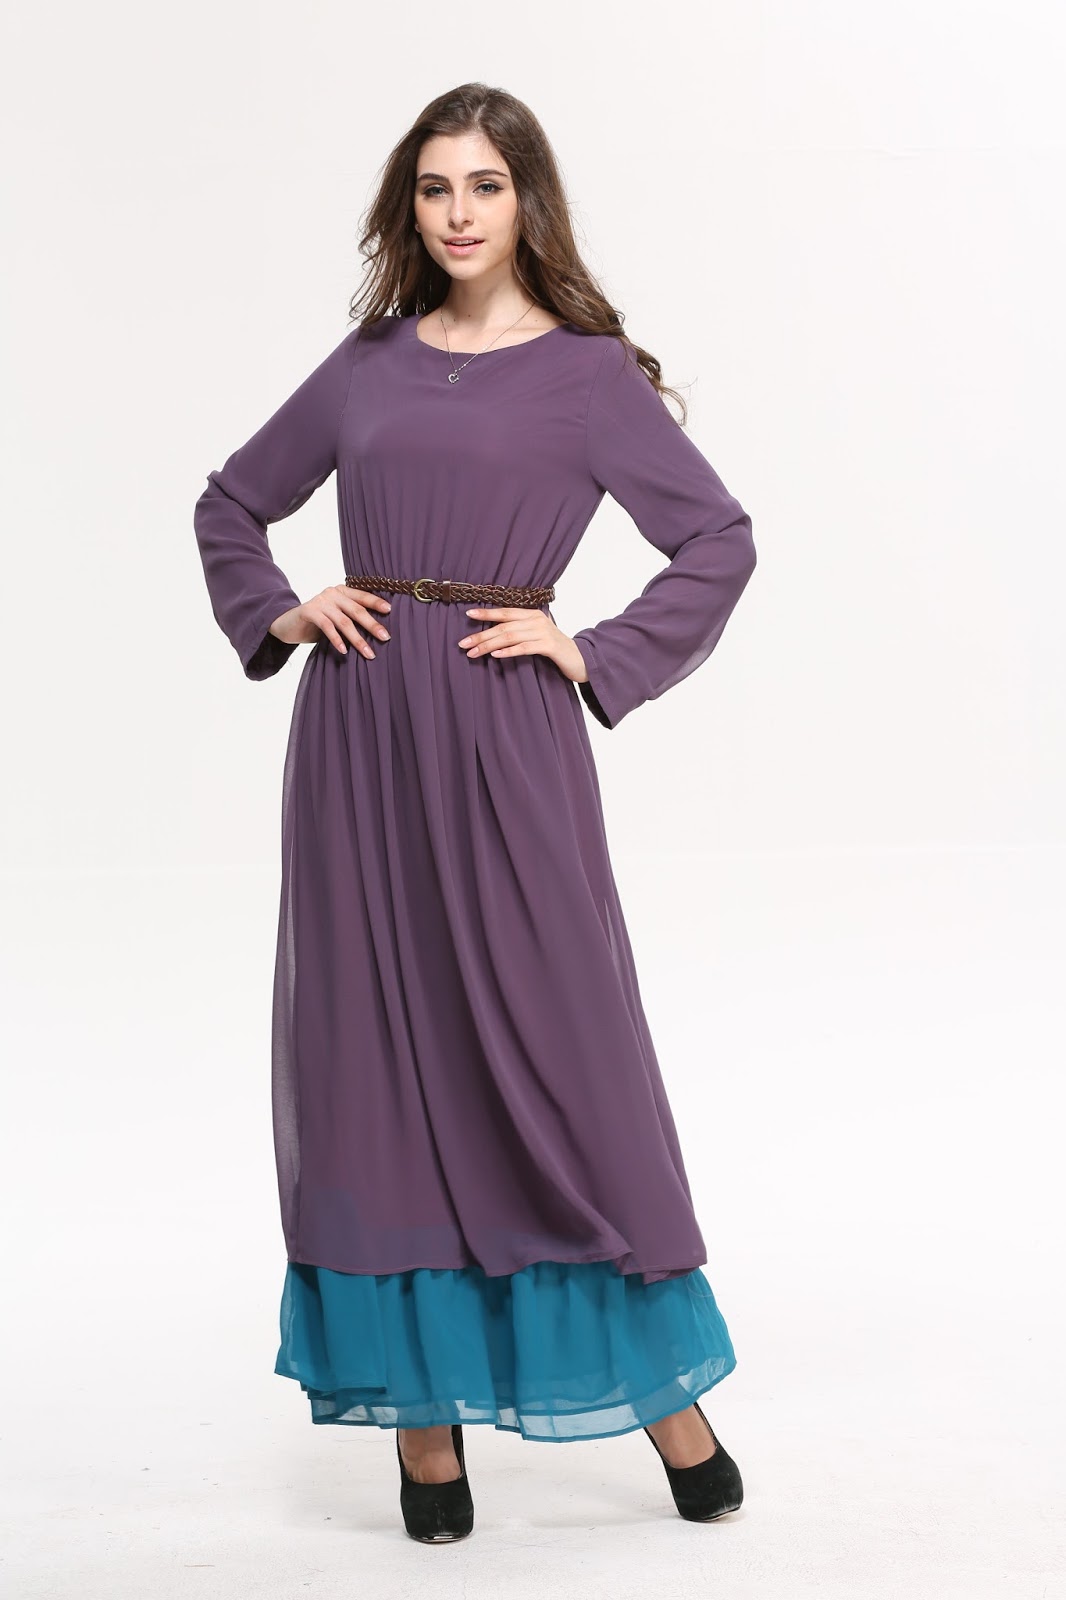 SweetSistas Boutique: LAYER JUBAH WITH BELT